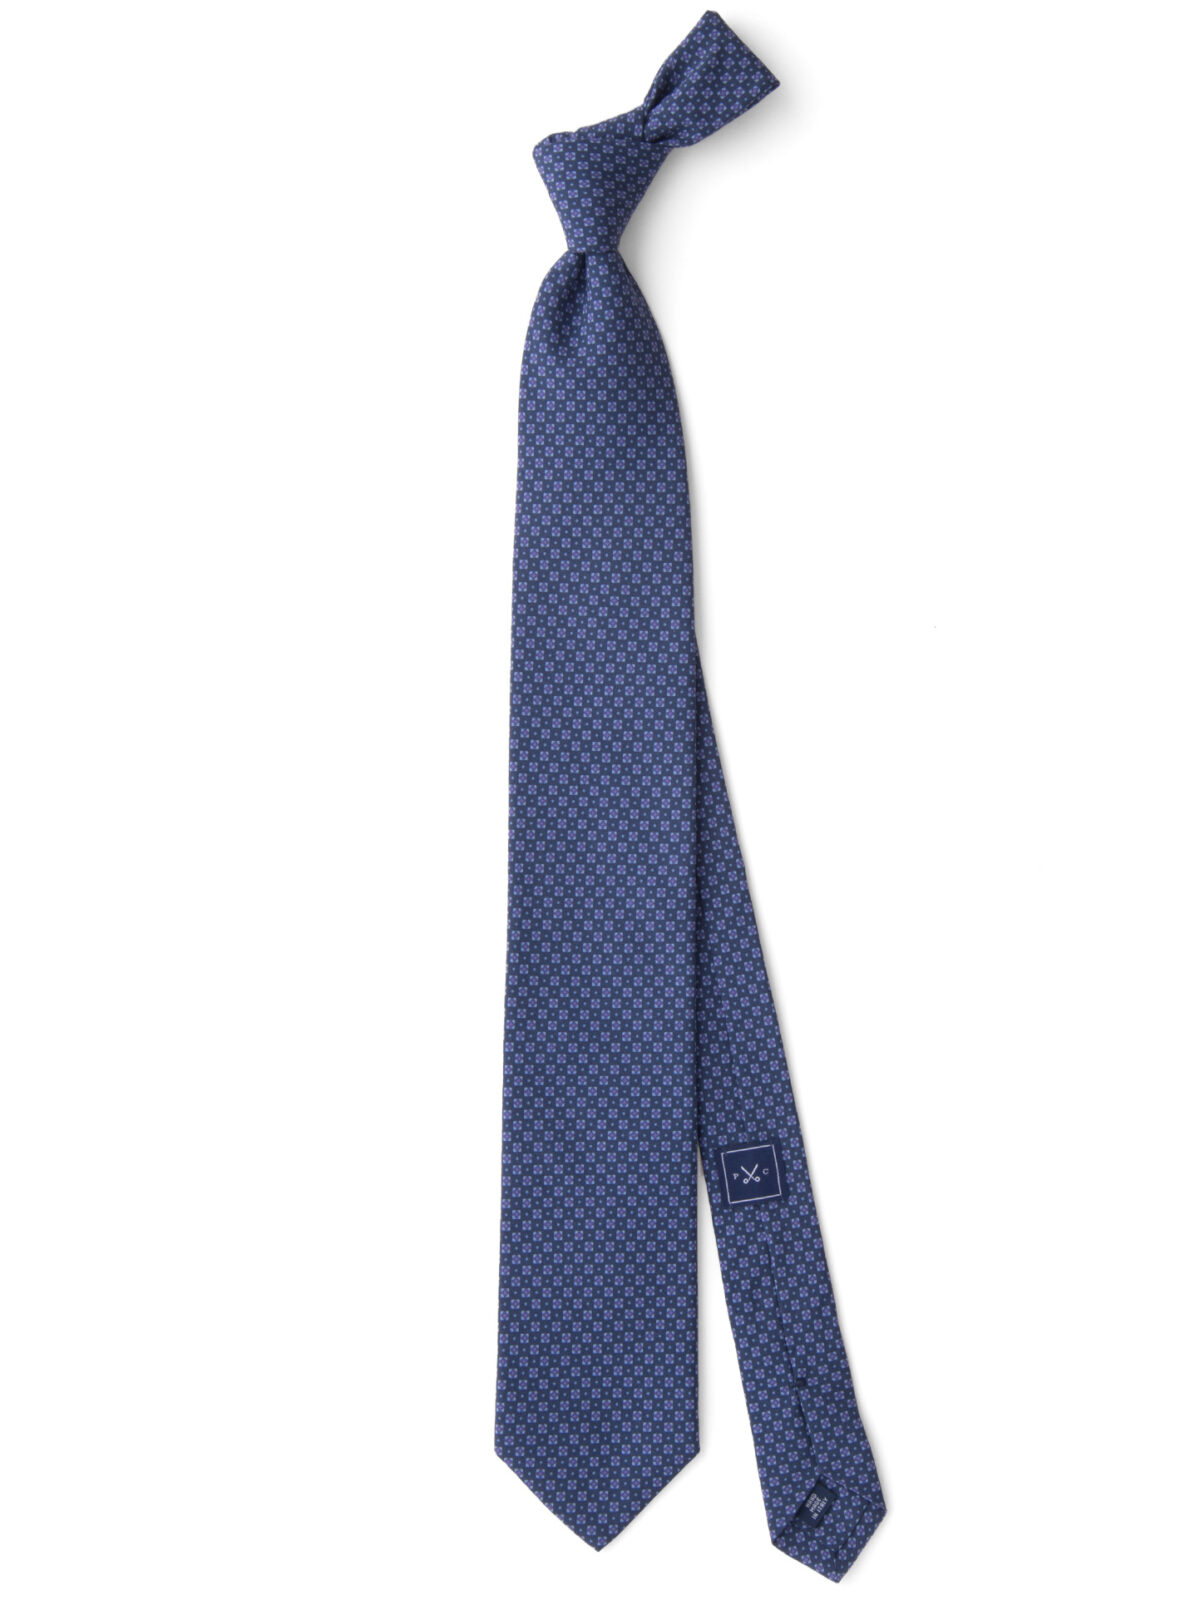 Blue and Lavender Small Foulard Print Tie